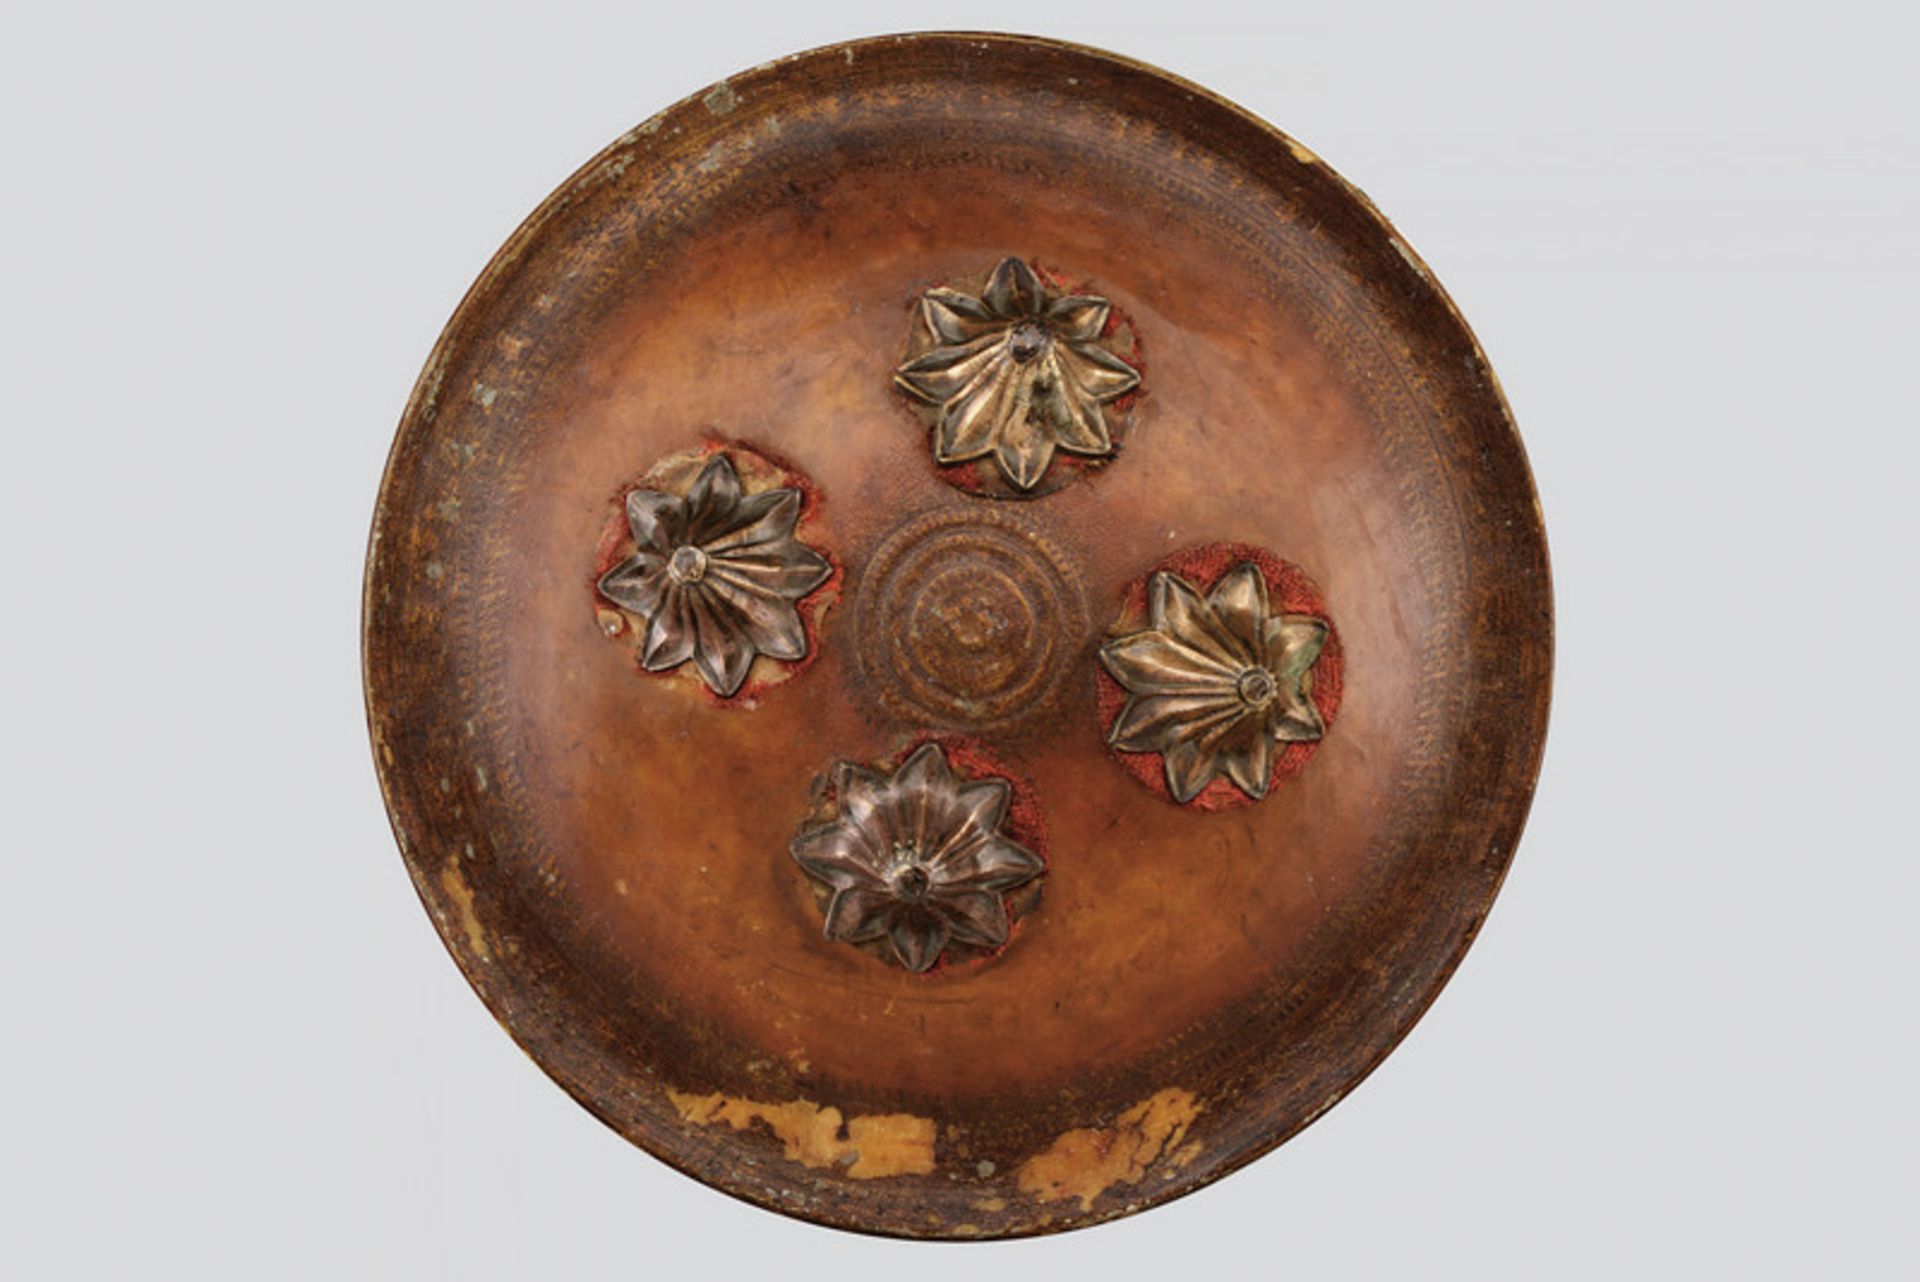 A small dahl dating: first quarter of the 19th Century provenance: India Of round, convex shape; - Image 3 of 3